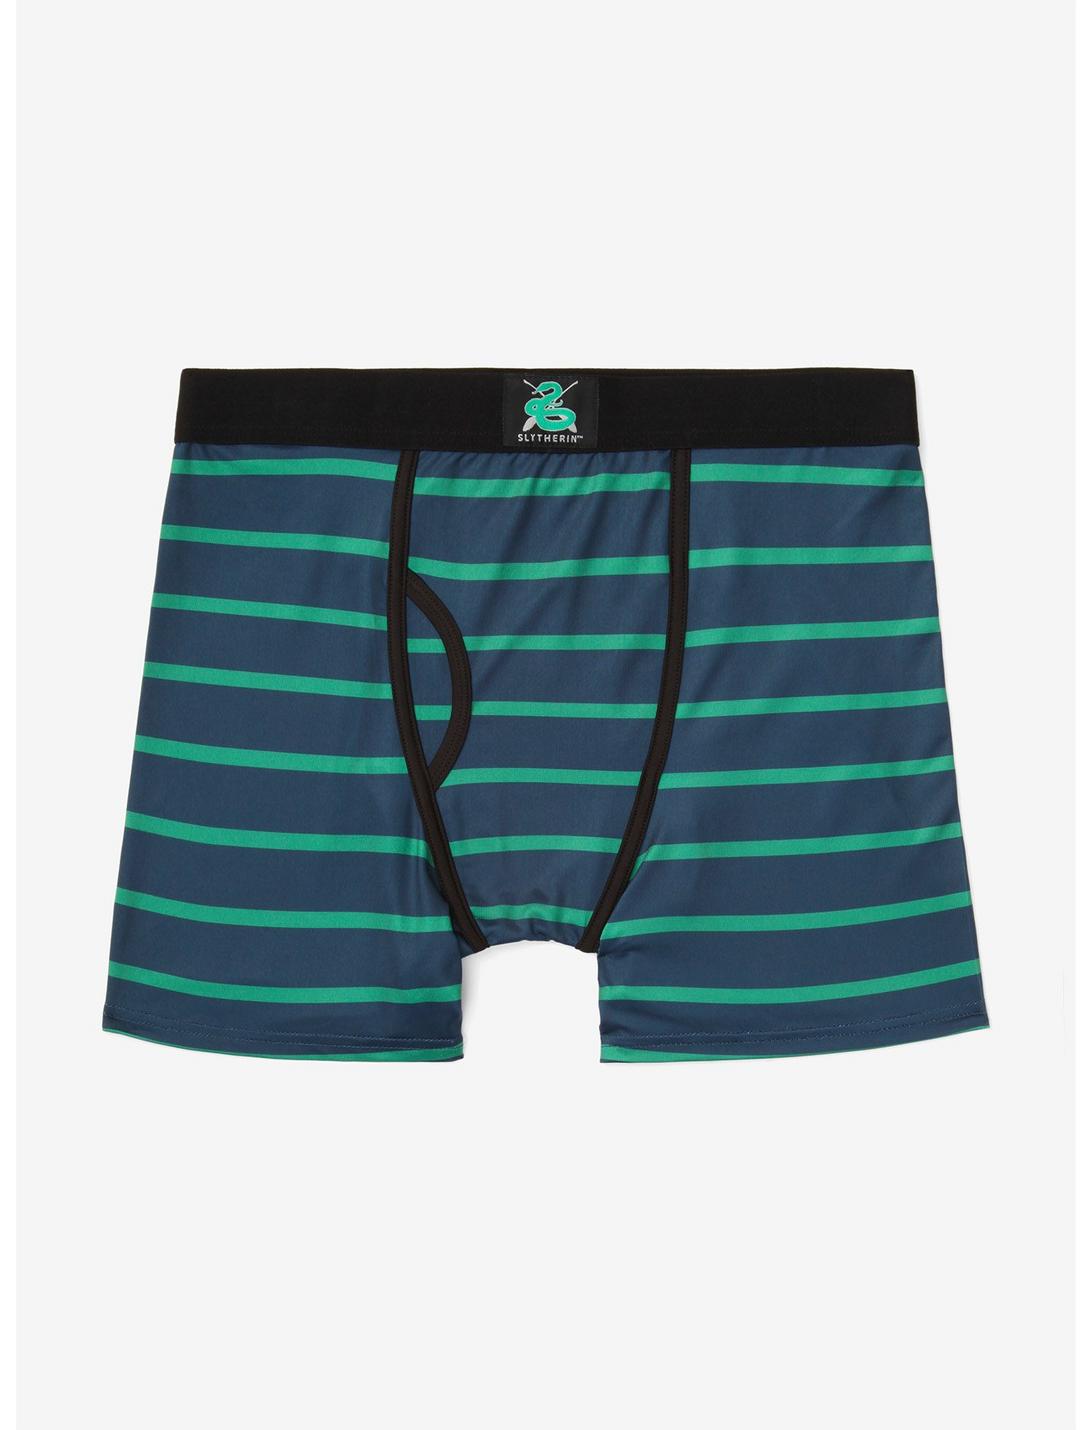 Harry Potter Slytherin Striped Boxer Briefs - BoxLunch Exclusive, GREEN, hi-res